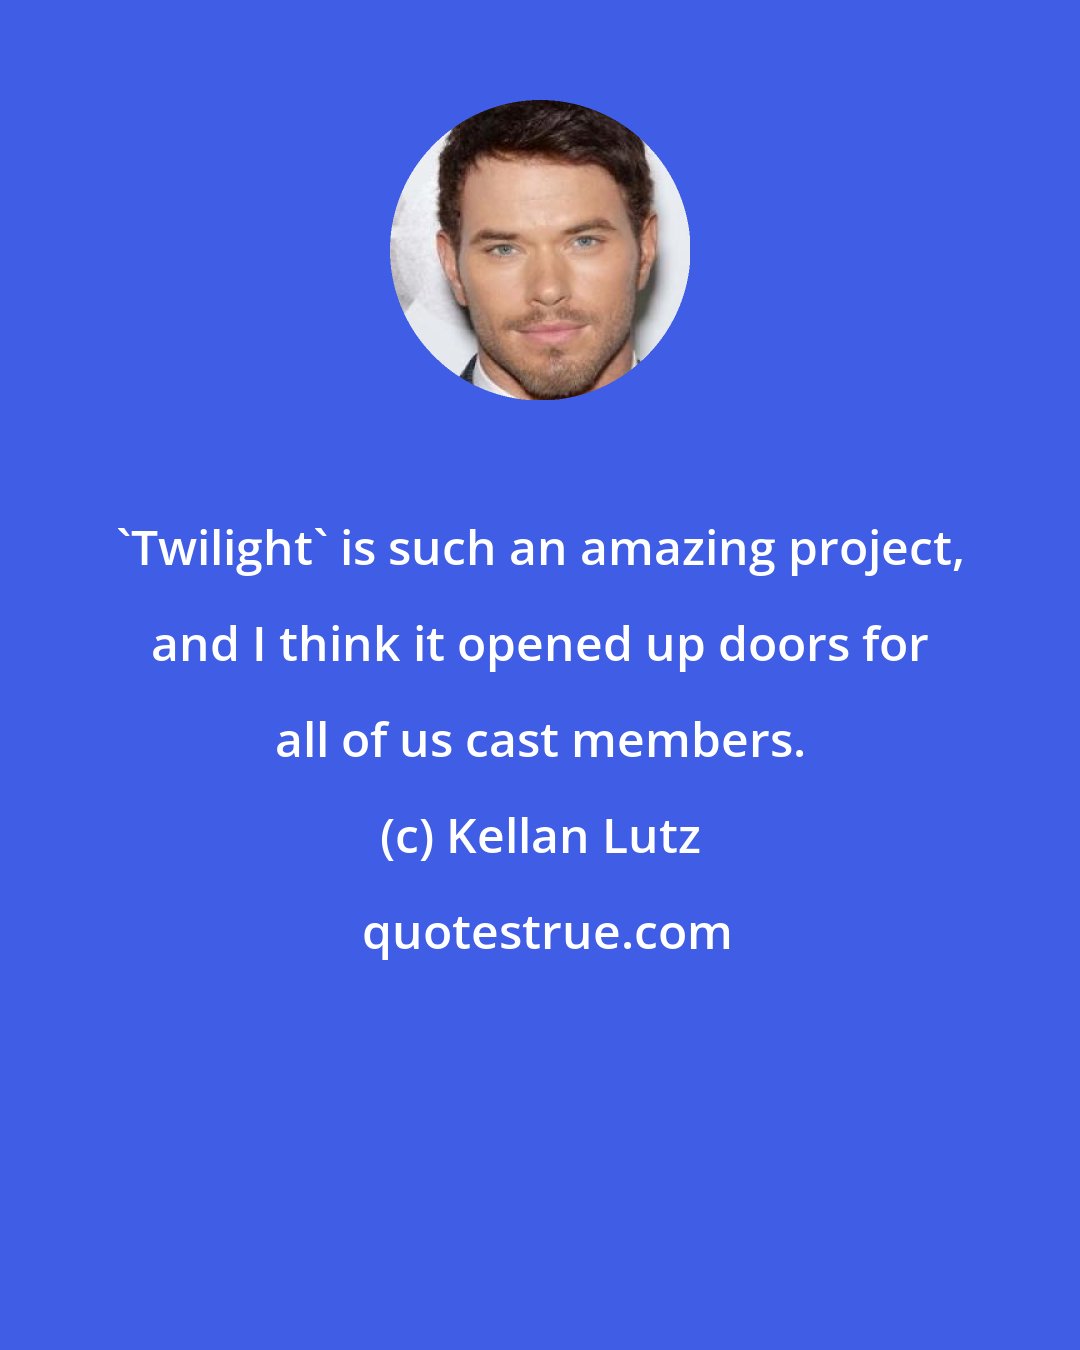 Kellan Lutz: 'Twilight' is such an amazing project, and I think it opened up doors for all of us cast members.